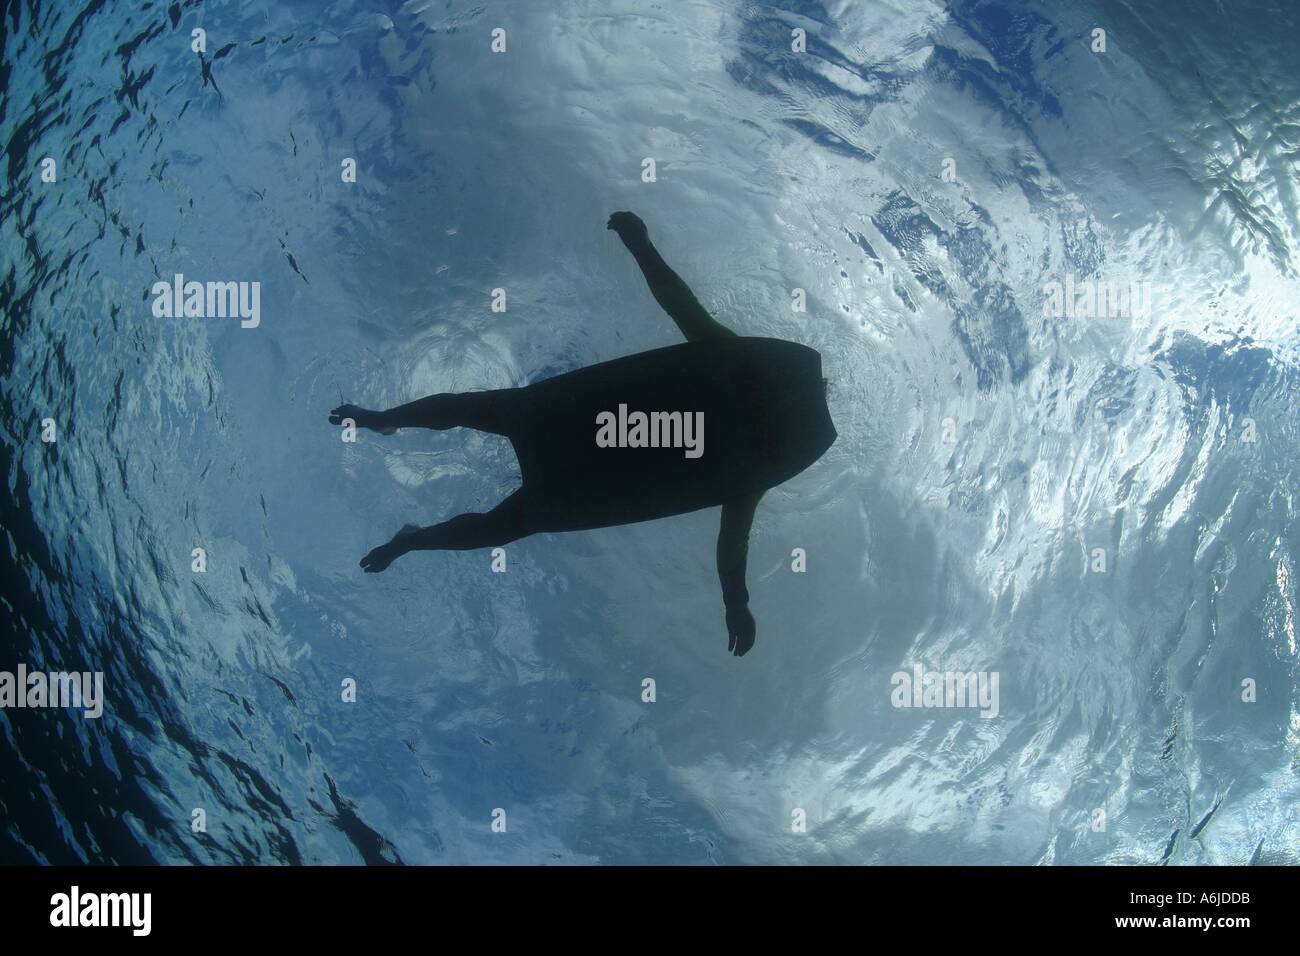 Sharks eye view of a man MR floating on a boogy board Hawaii  Stock Photo